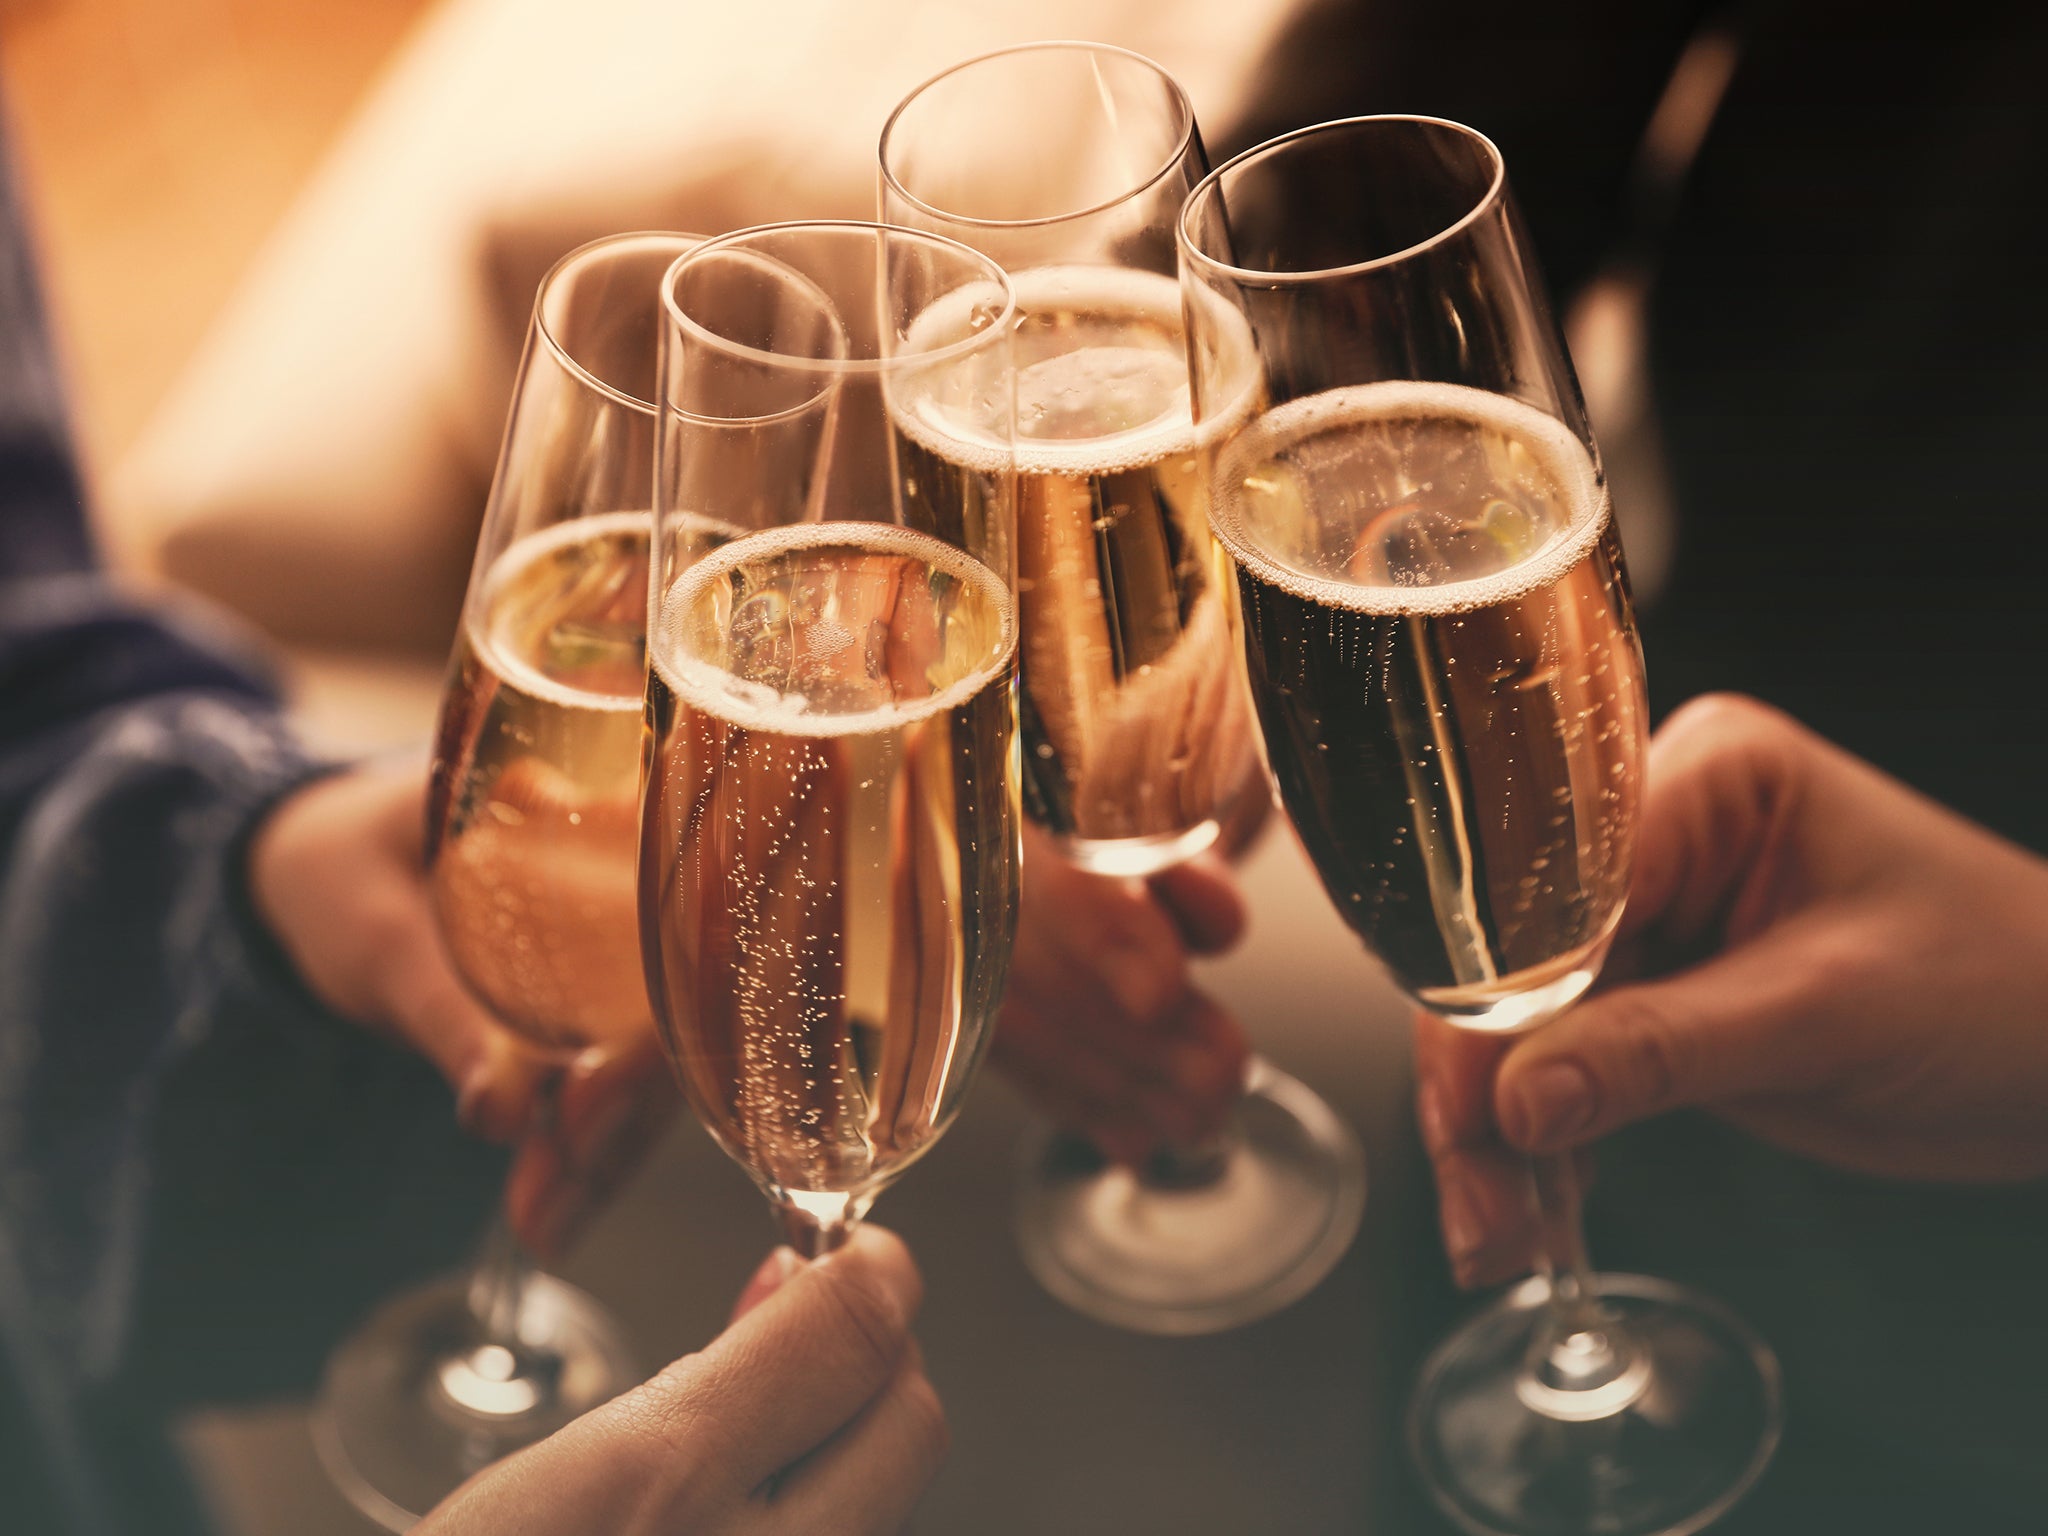 Make your celebrations sparkle with our recommendations